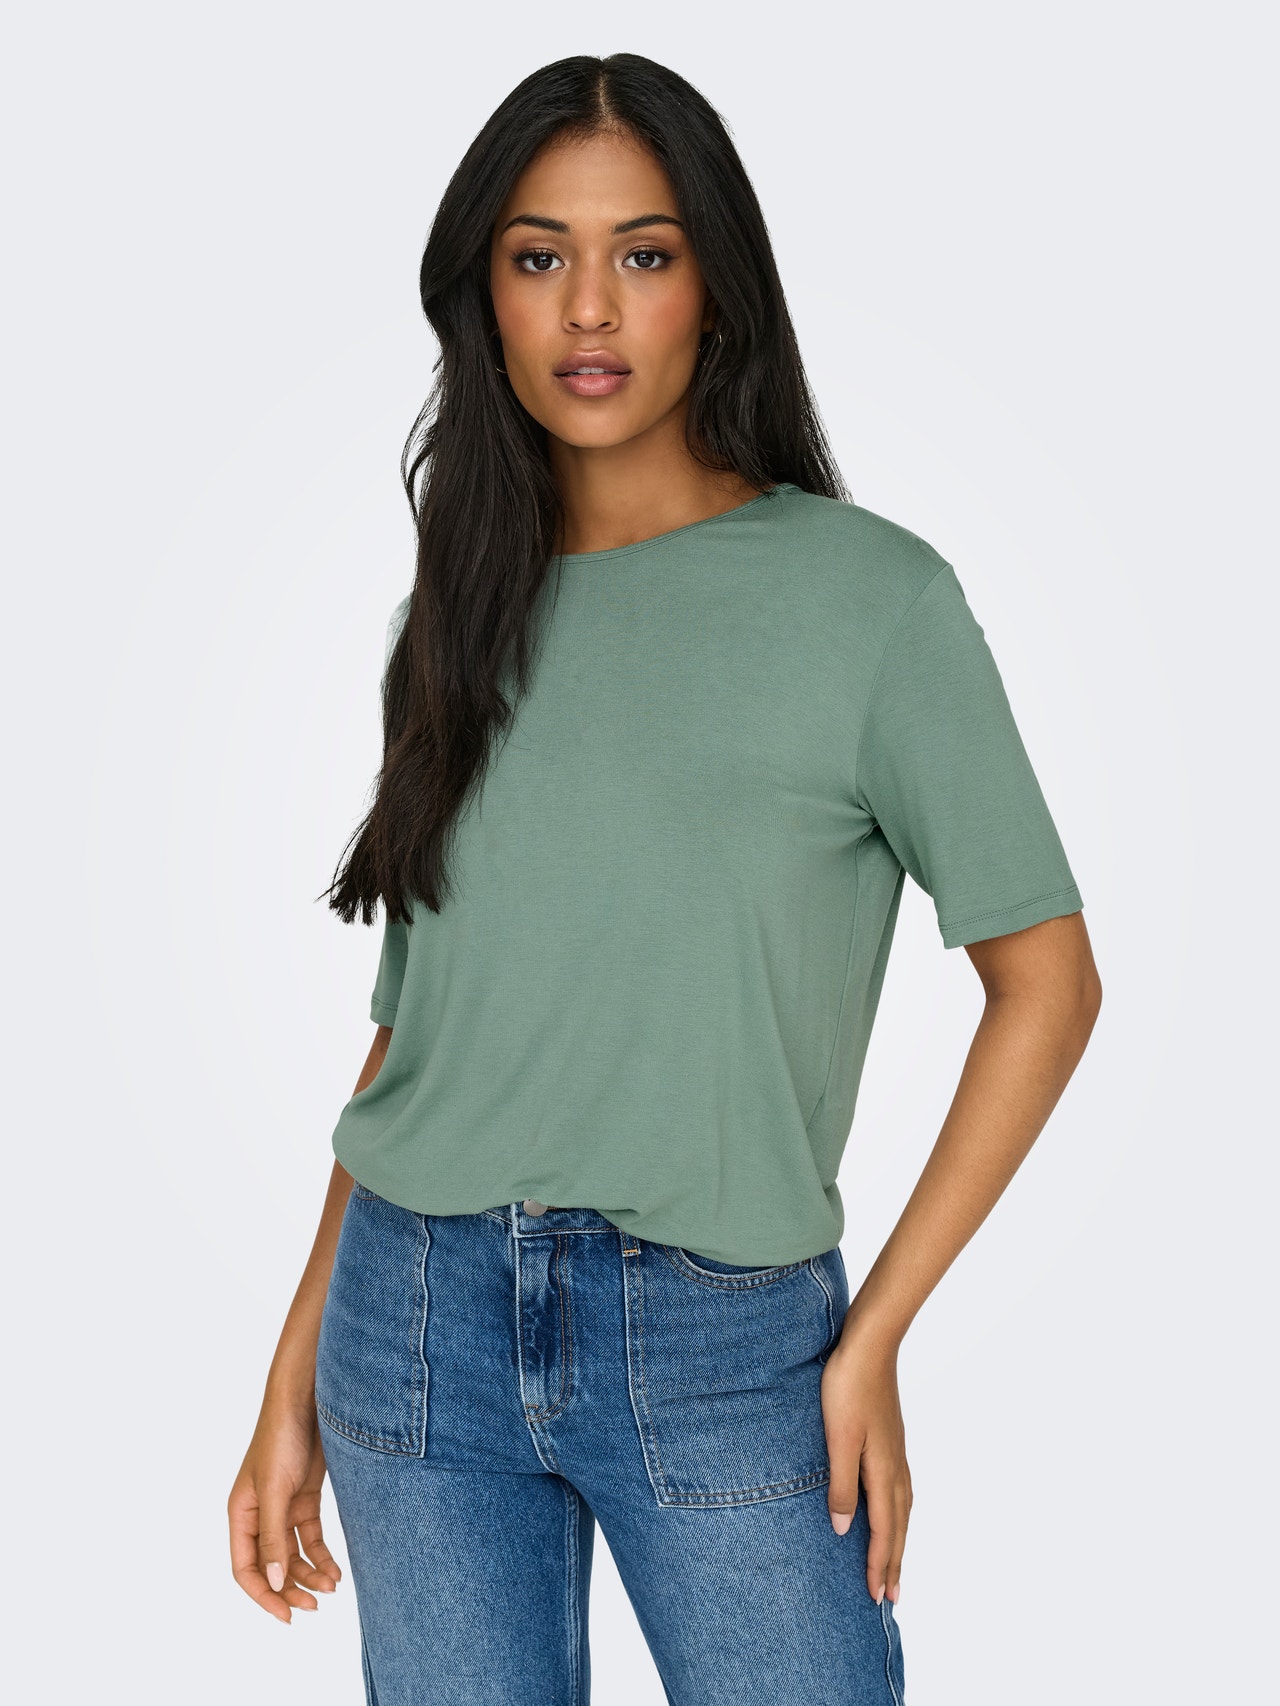 ONLY O-hals top -Chinois Green - 15330819